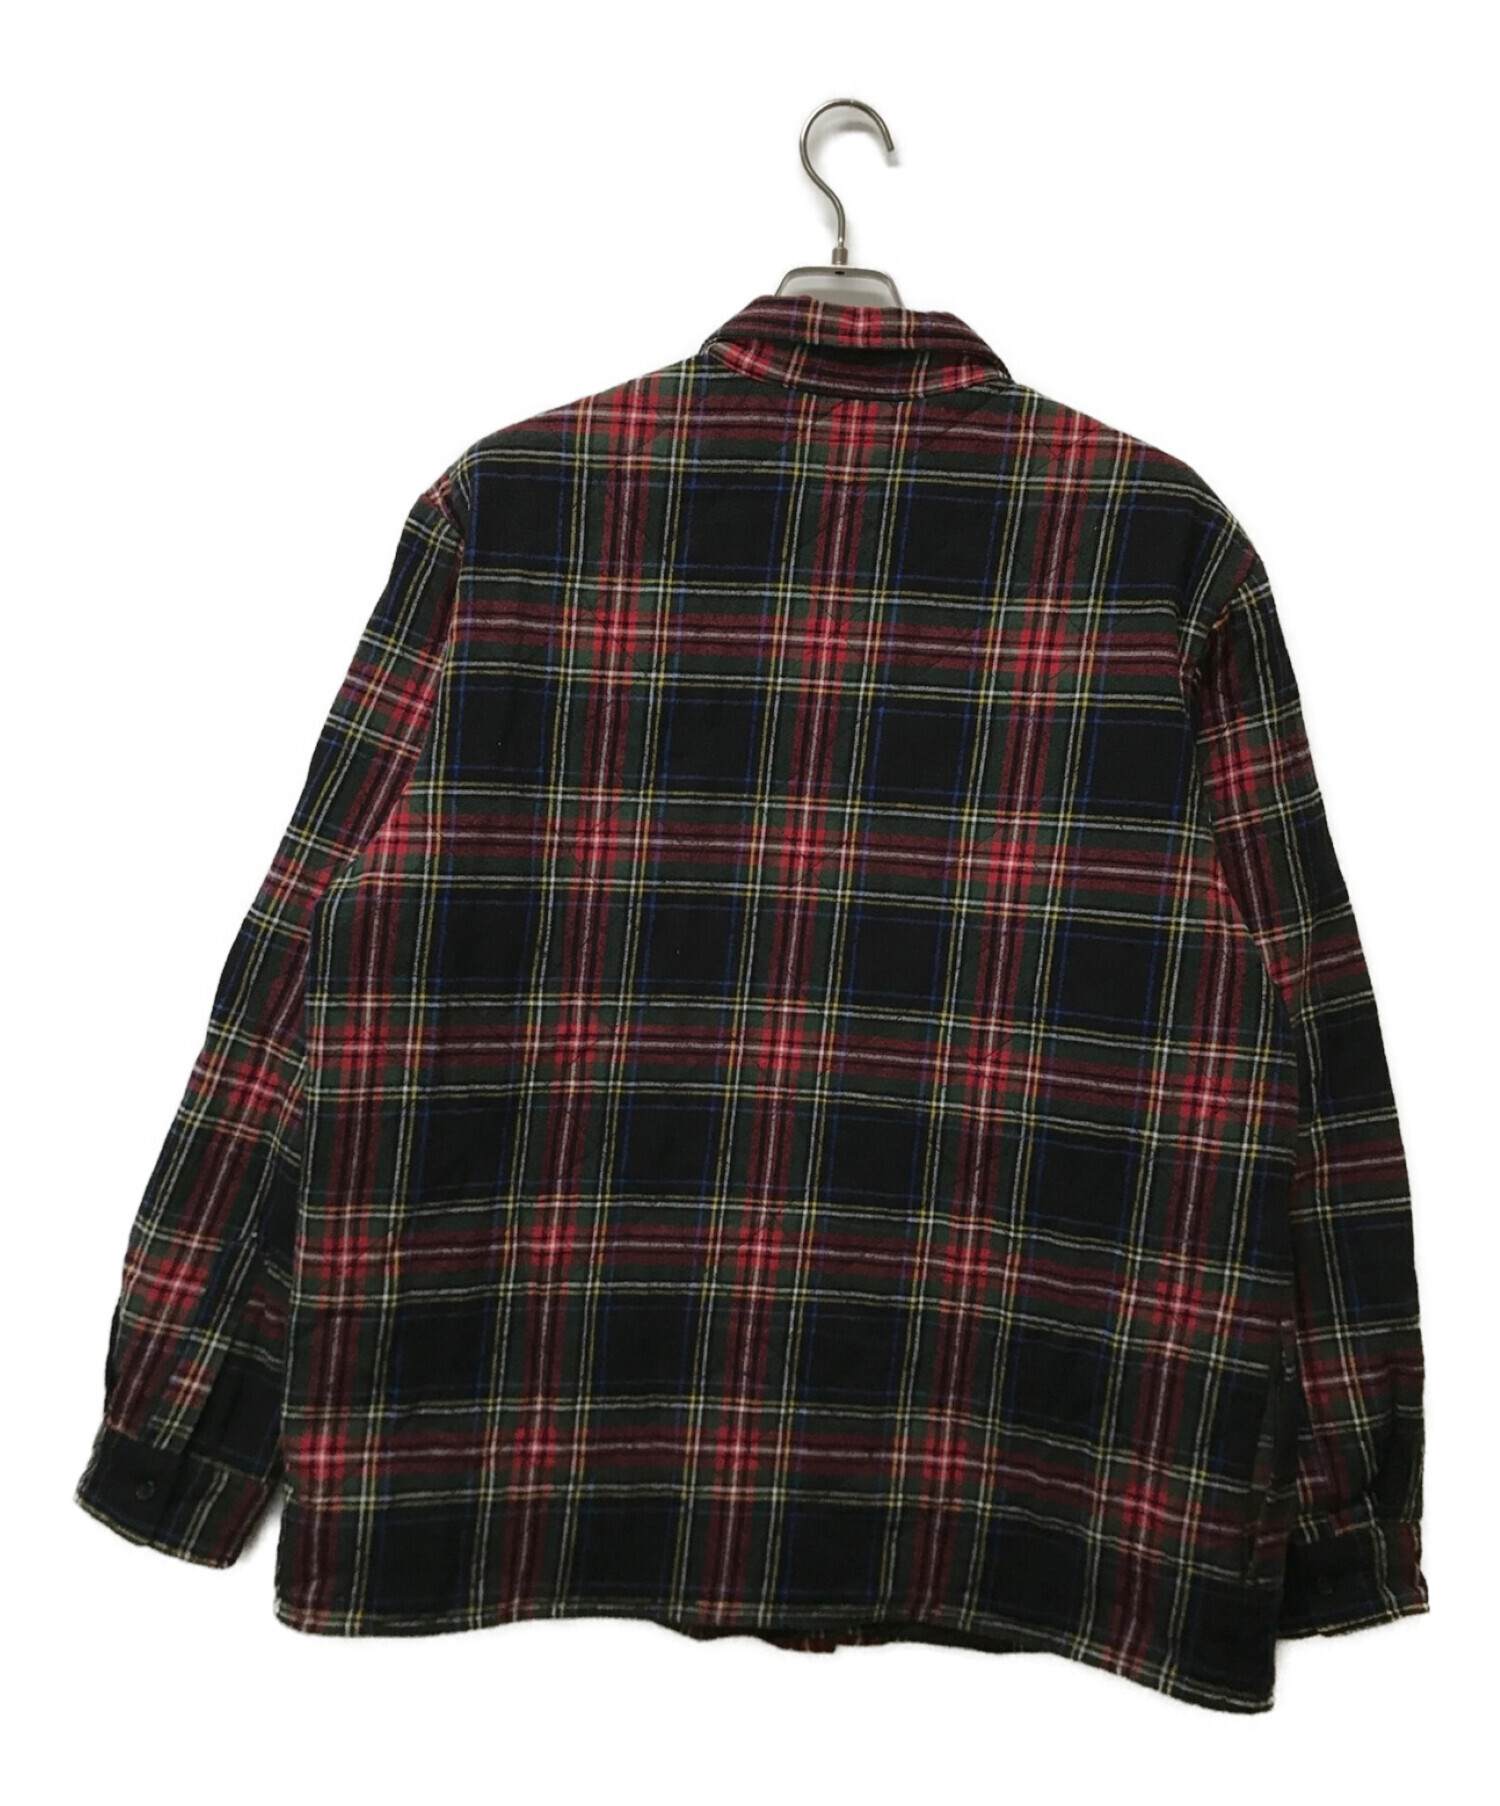 Supreme Quilted Plaid Flannel Shirt L